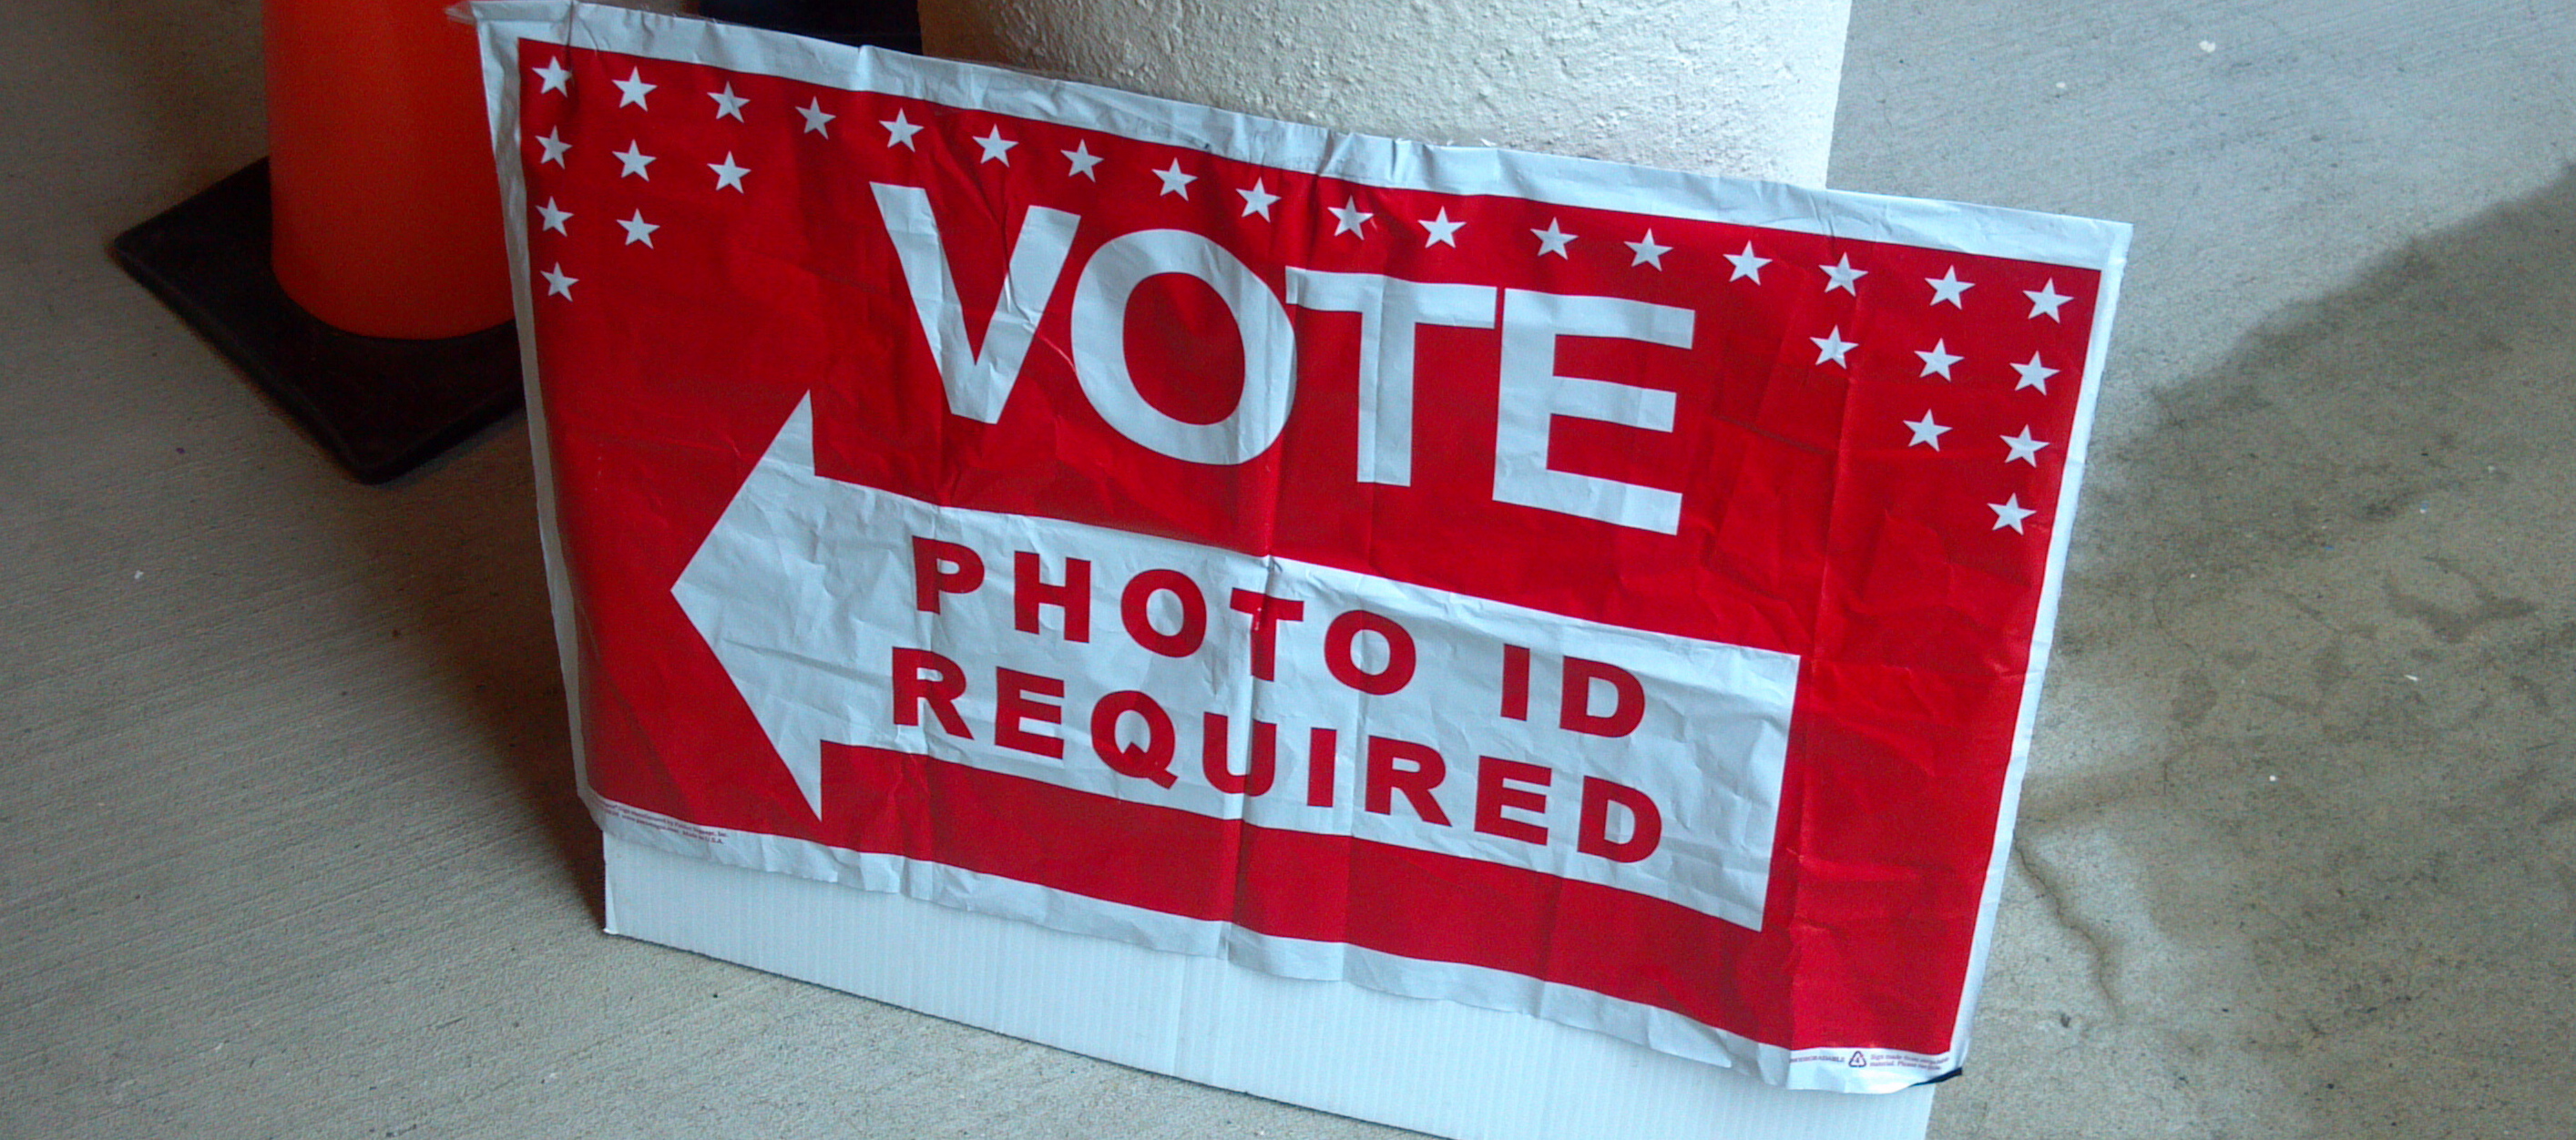 voter-id-required-sign.jpg